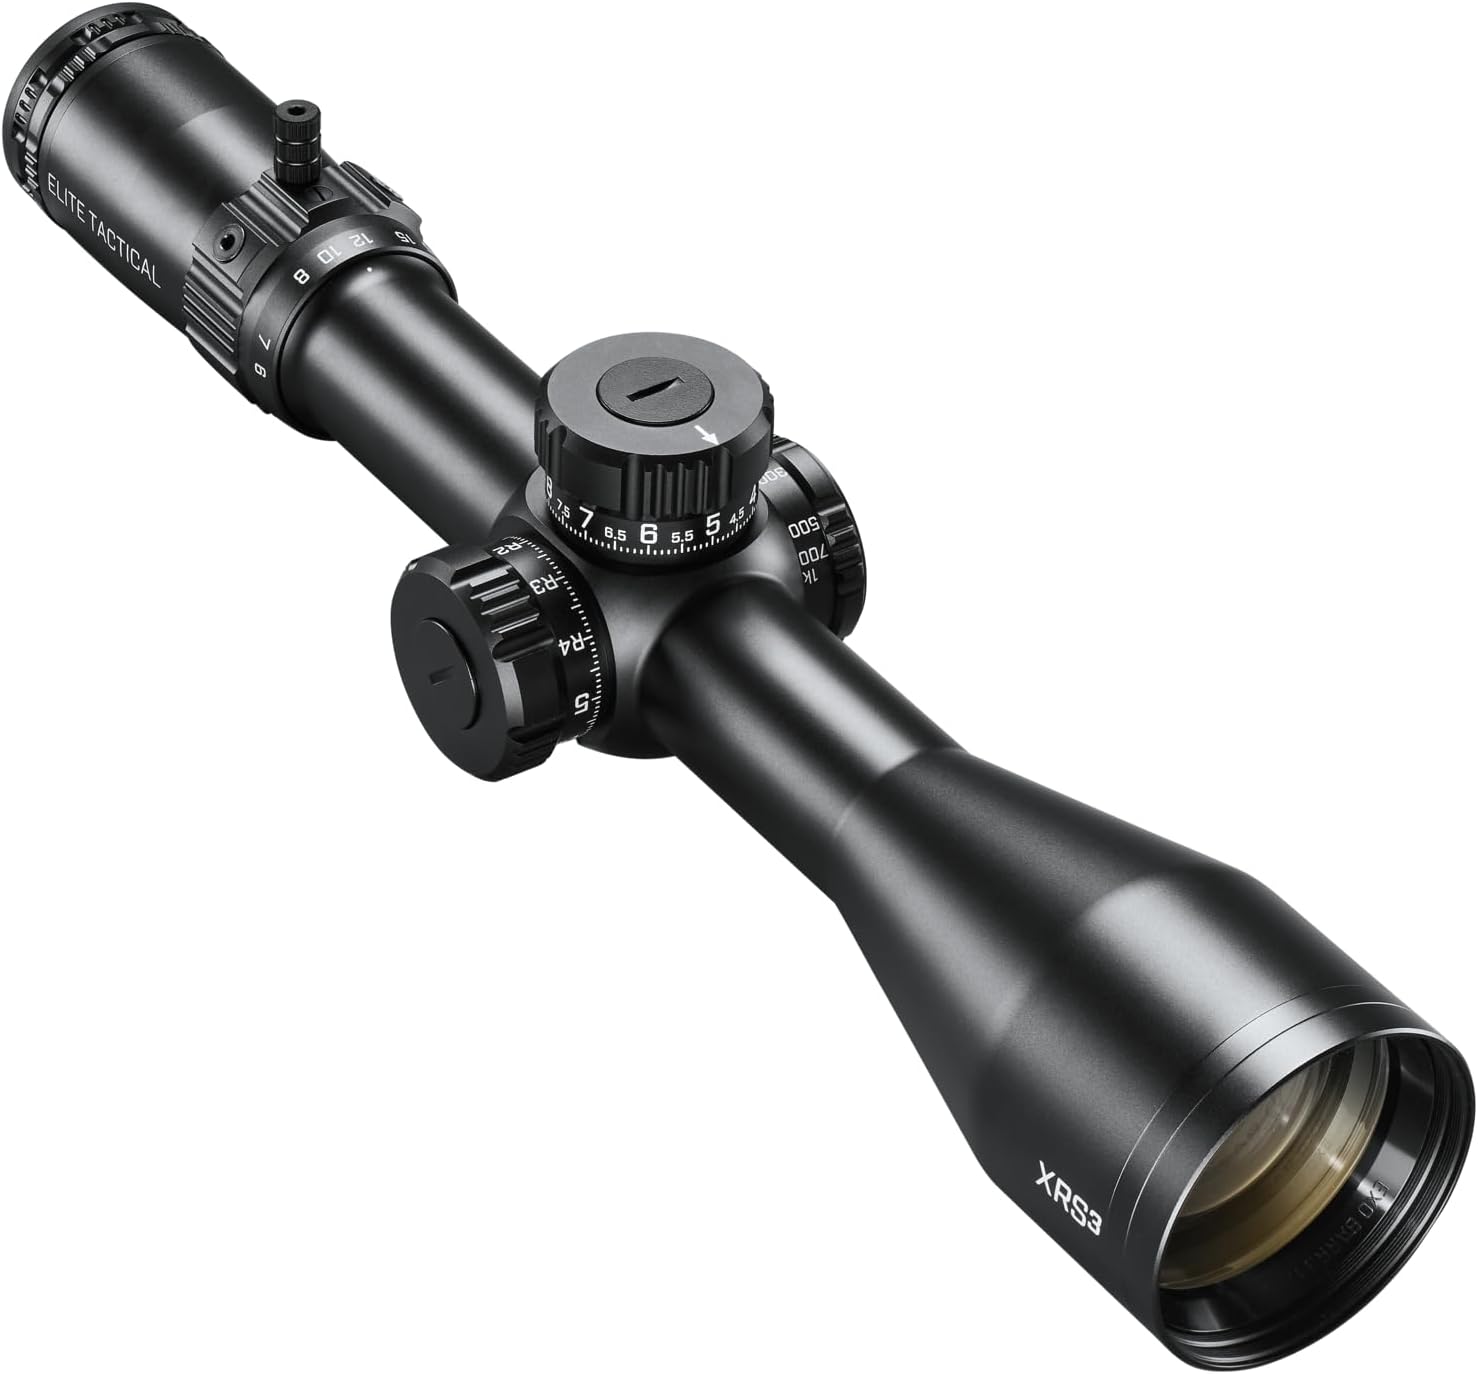 Bushnell Elite Tactical Riflescope Review